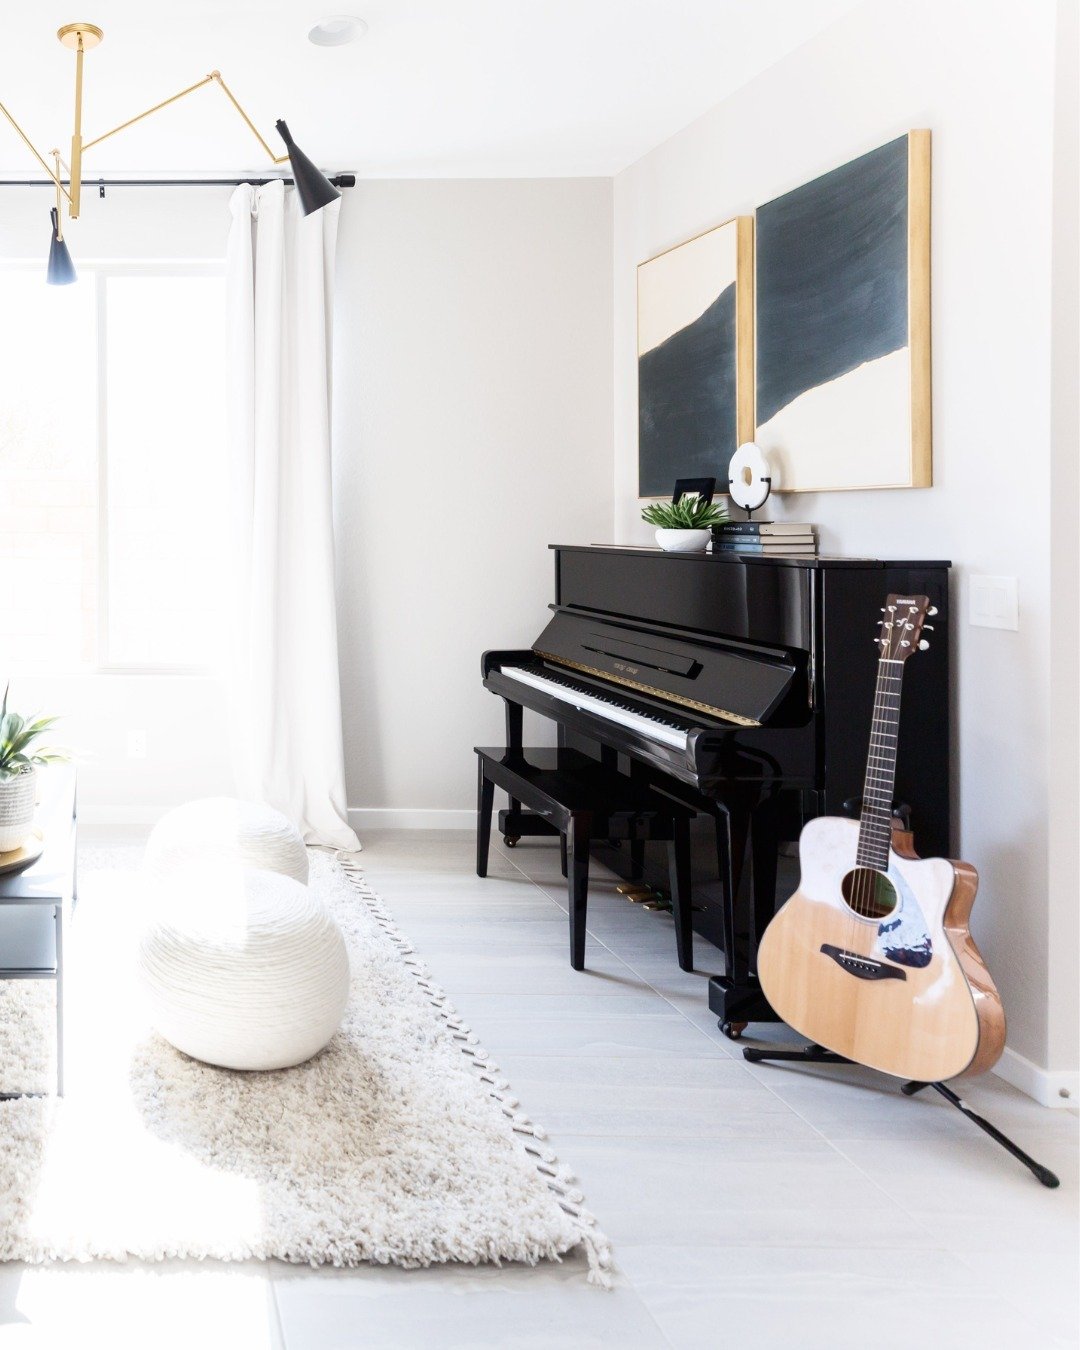 We love bringing our clients&rsquo; passions into their homes.

When we found out this client's daughter was a music enthusiast 🎶 we knew we had to incorporate the piano and guitar into the design.

If you ask us, working with a client is not just a